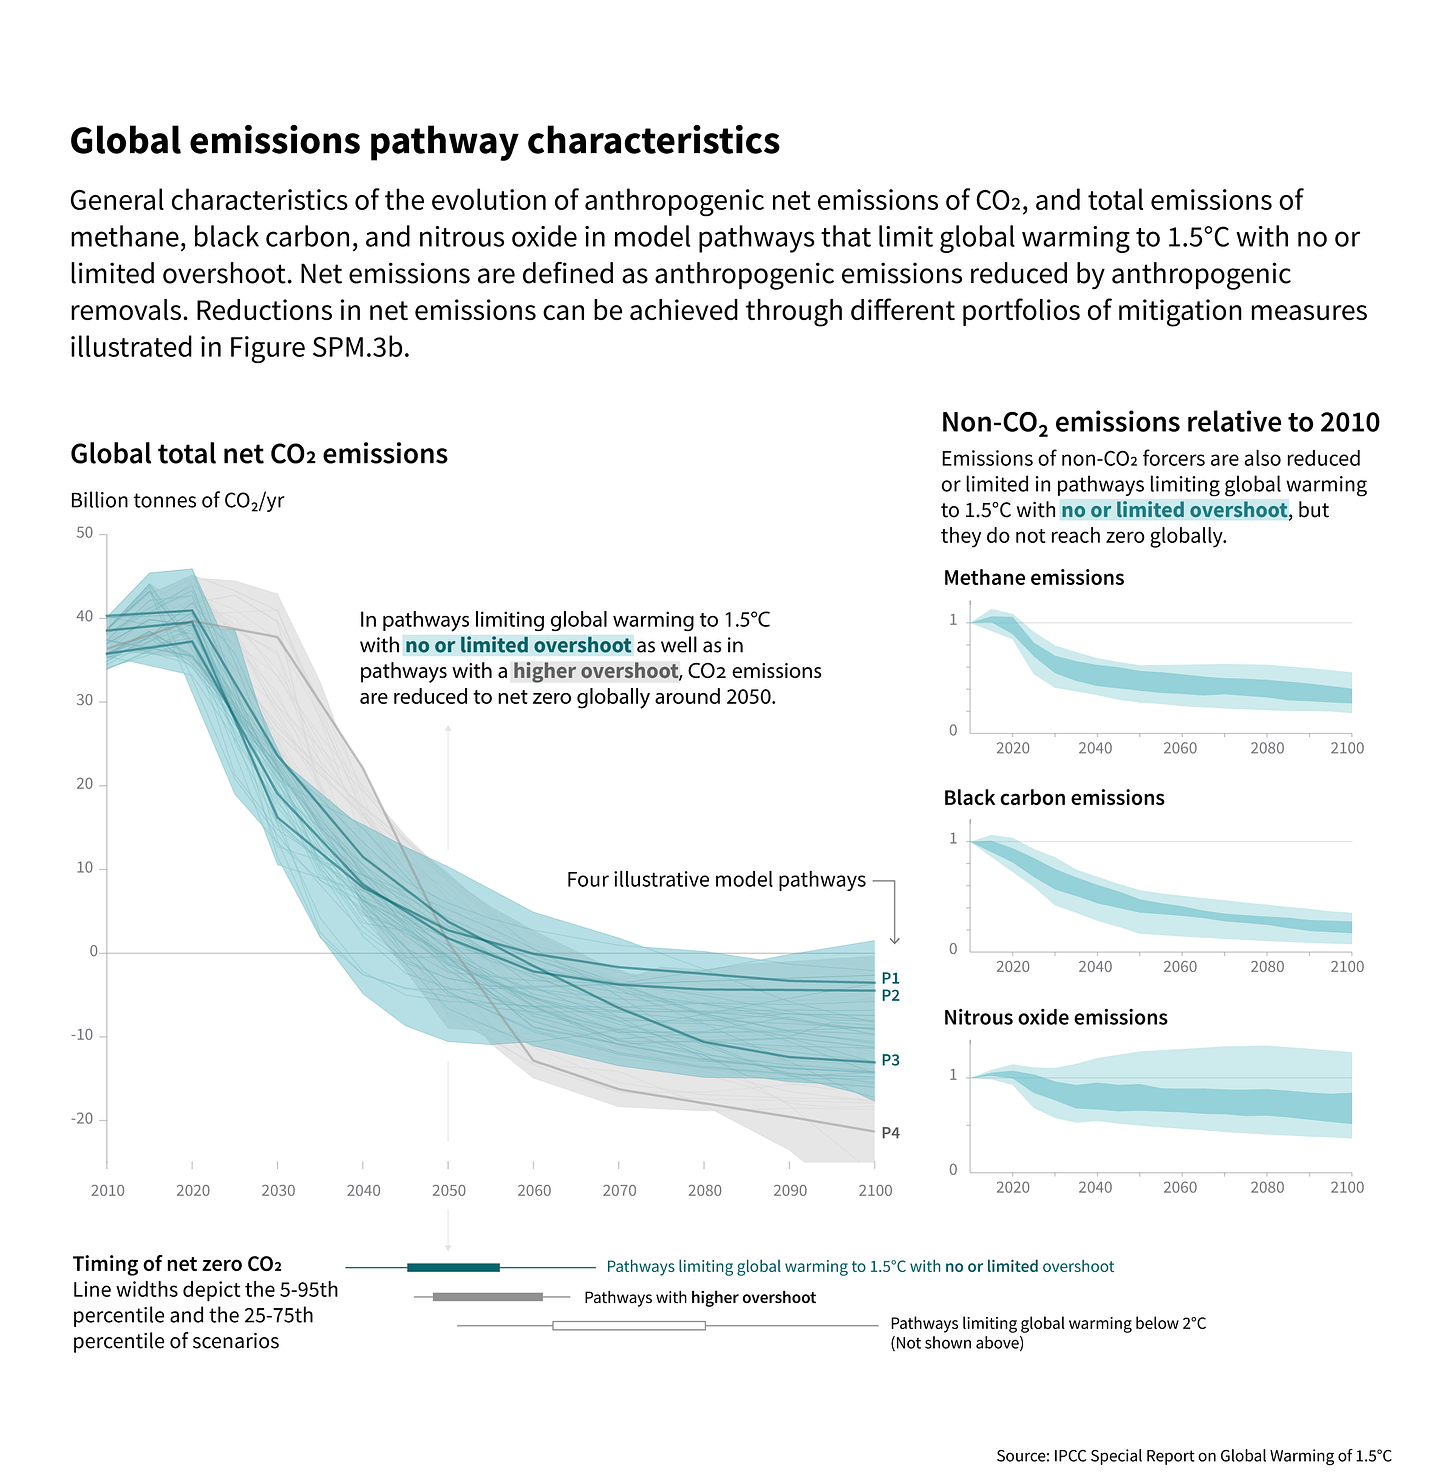 IPCC graphic showing what "net" emissions pathways means.